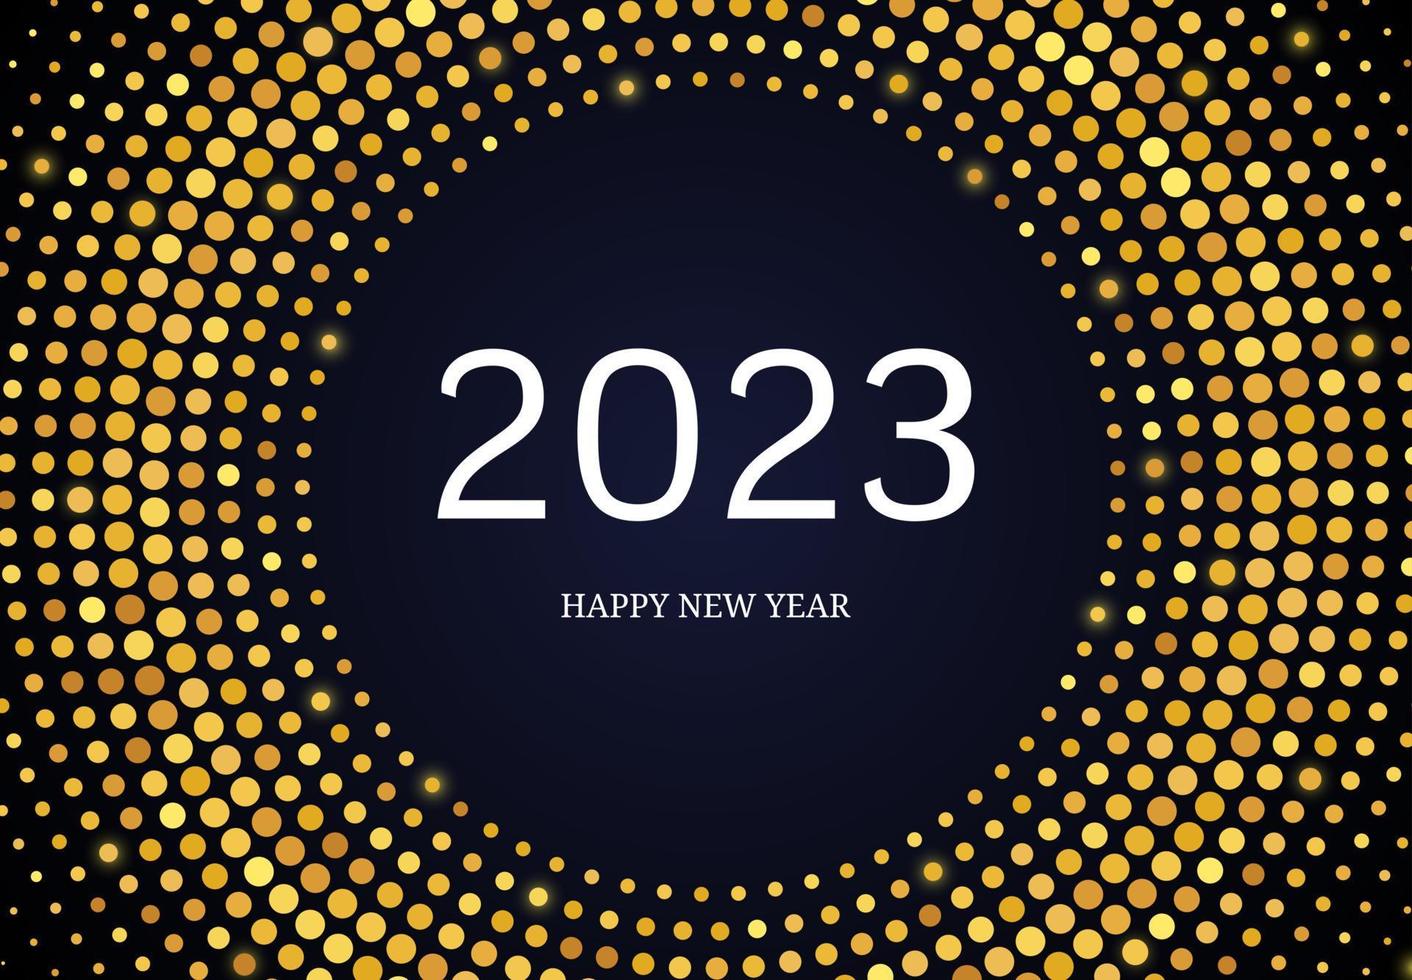 2023 Happy New Year of gold glitter pattern in circle form. Abstract gold glowing halftone dotted background for Christmas holiday greeting card on dark background. Vector illustration